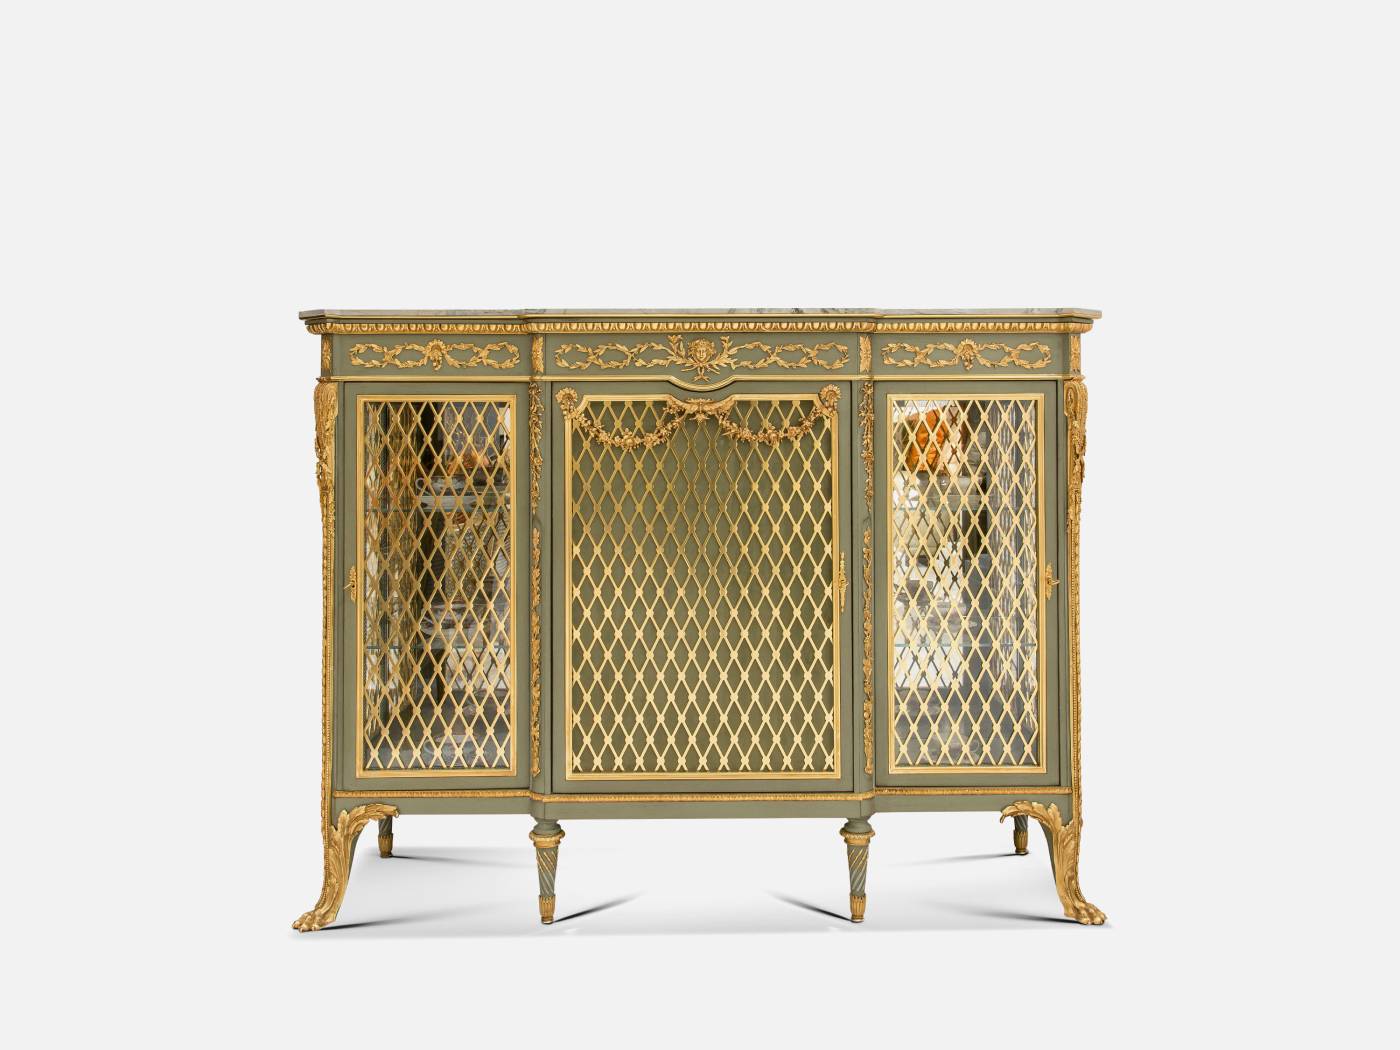 ART. 567/19 – Discover the elegance of luxury classic Sideboards made in Italy by C.G. Capelletti. Luxury classic furniture that combines style and craftsmanship.